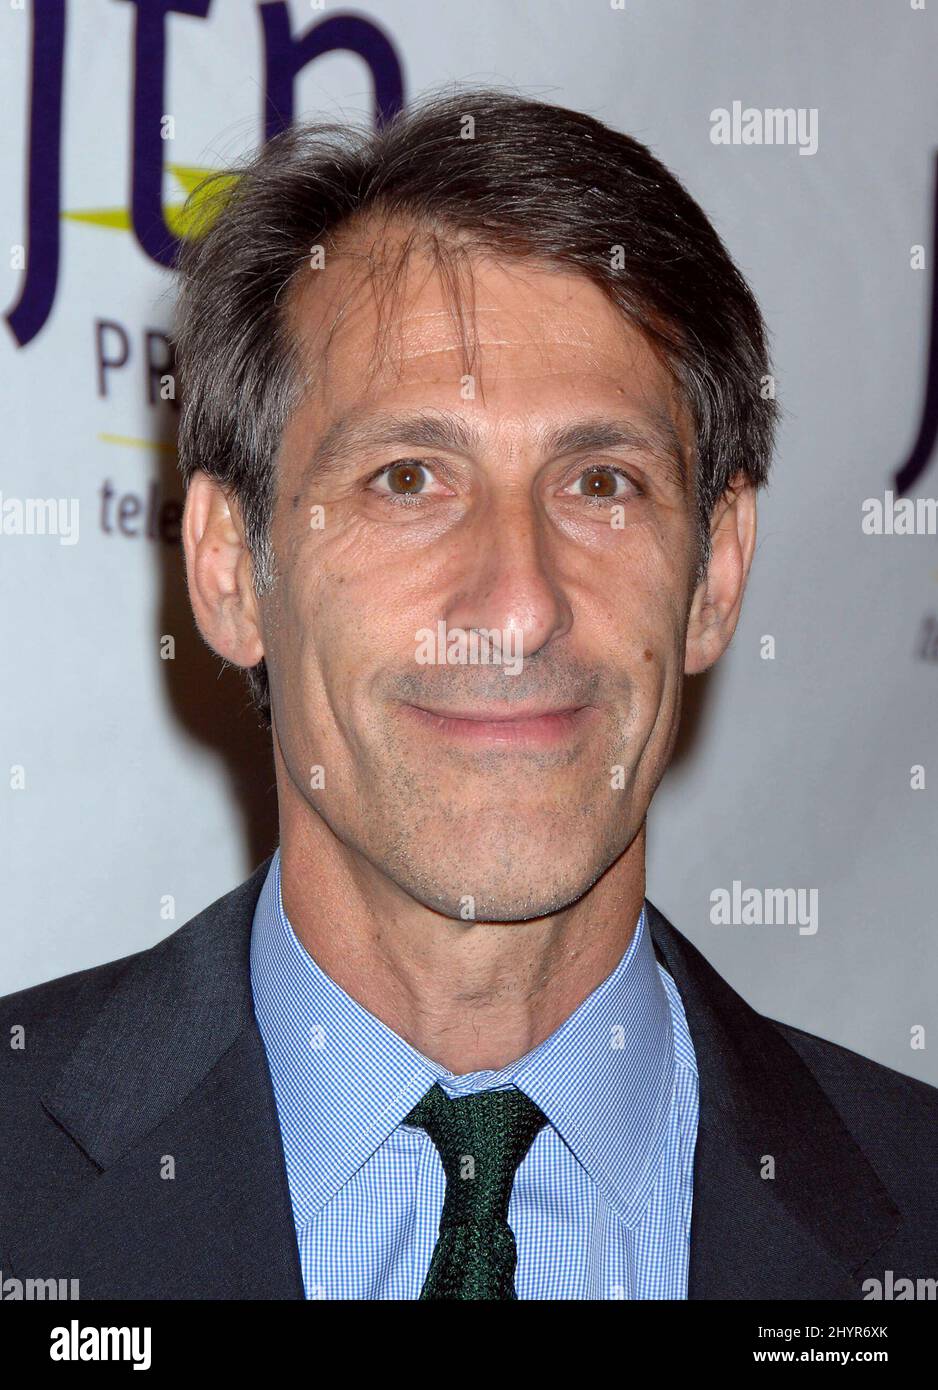 Michael Lynton of Sony Pictures Receiving JTN Productions' Vision Award Held at the Beverly Hills Hotel in Los Angeles. Stock Photo